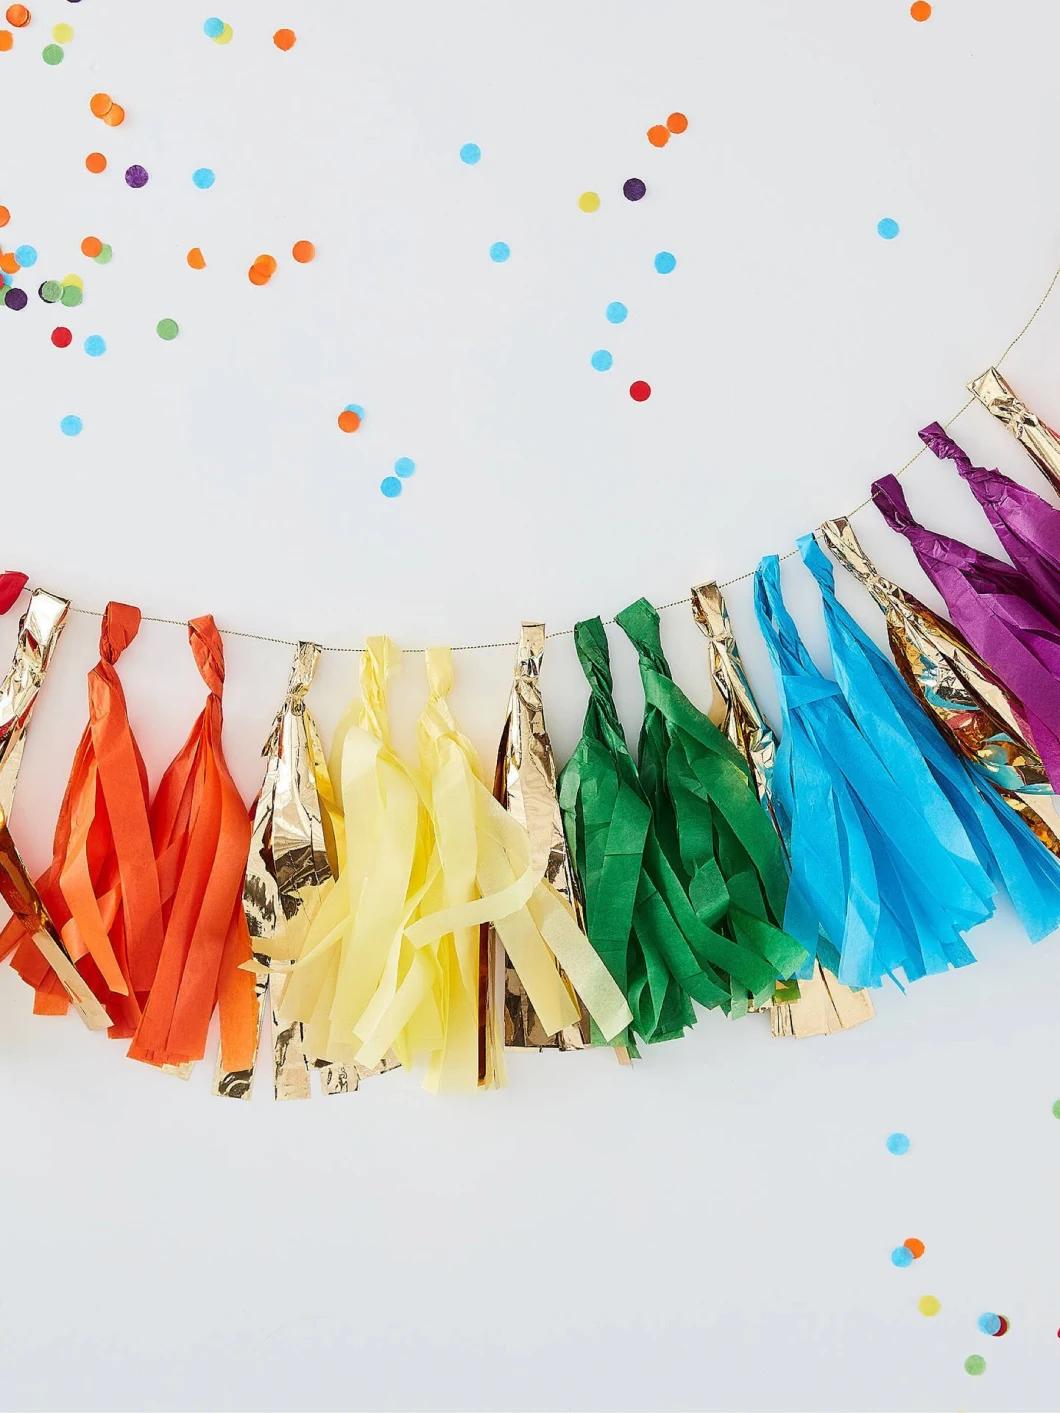 New Dazzle Gold Silver Color Candy Transparent Paper Tassel Pull Balloon Paper Tassel Paper Pull Birthday Party Wedding Christmas Decoration 5 Pieces/Bag